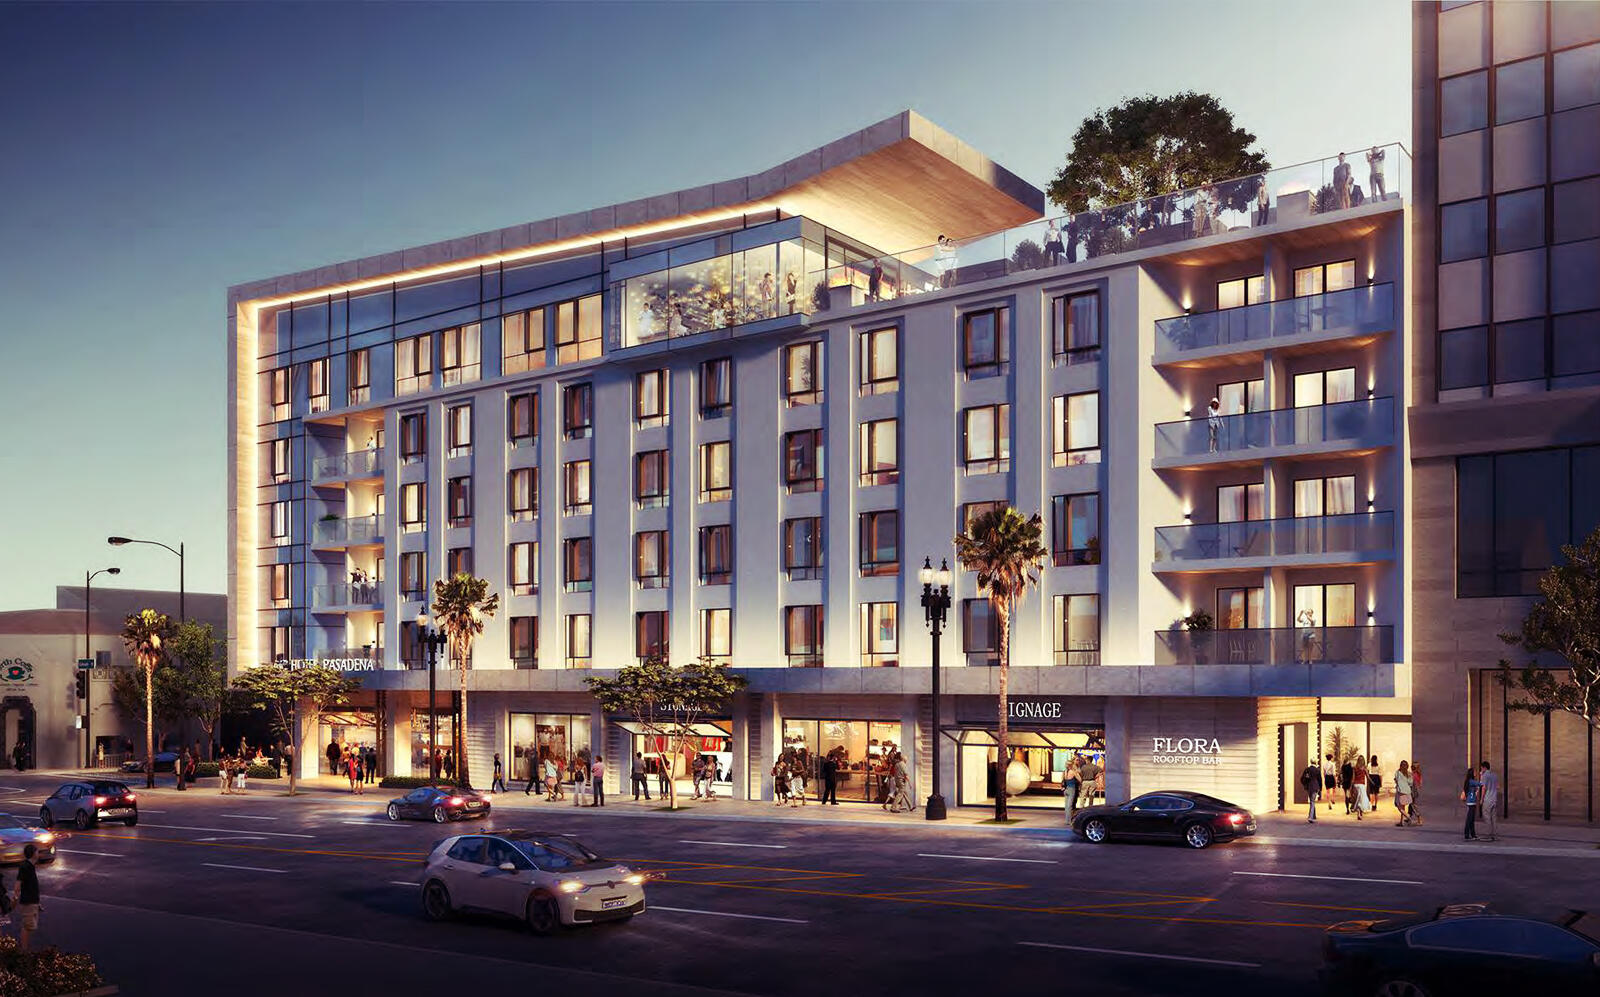 Rendering of the Project (City of Pasadena Design Commission / WATG)